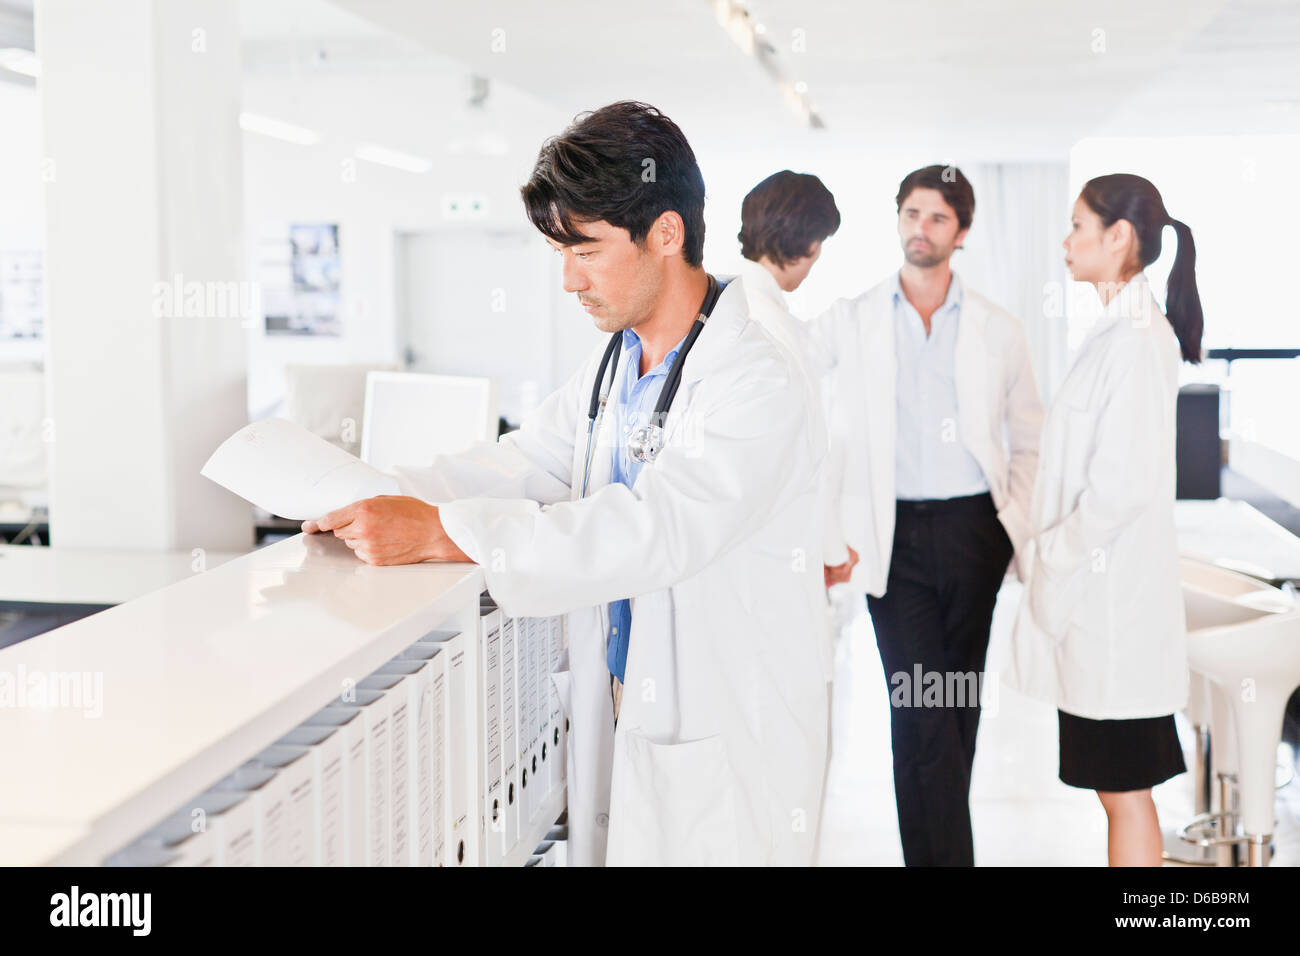 Doctor reading his notes in hallway Stock Photo